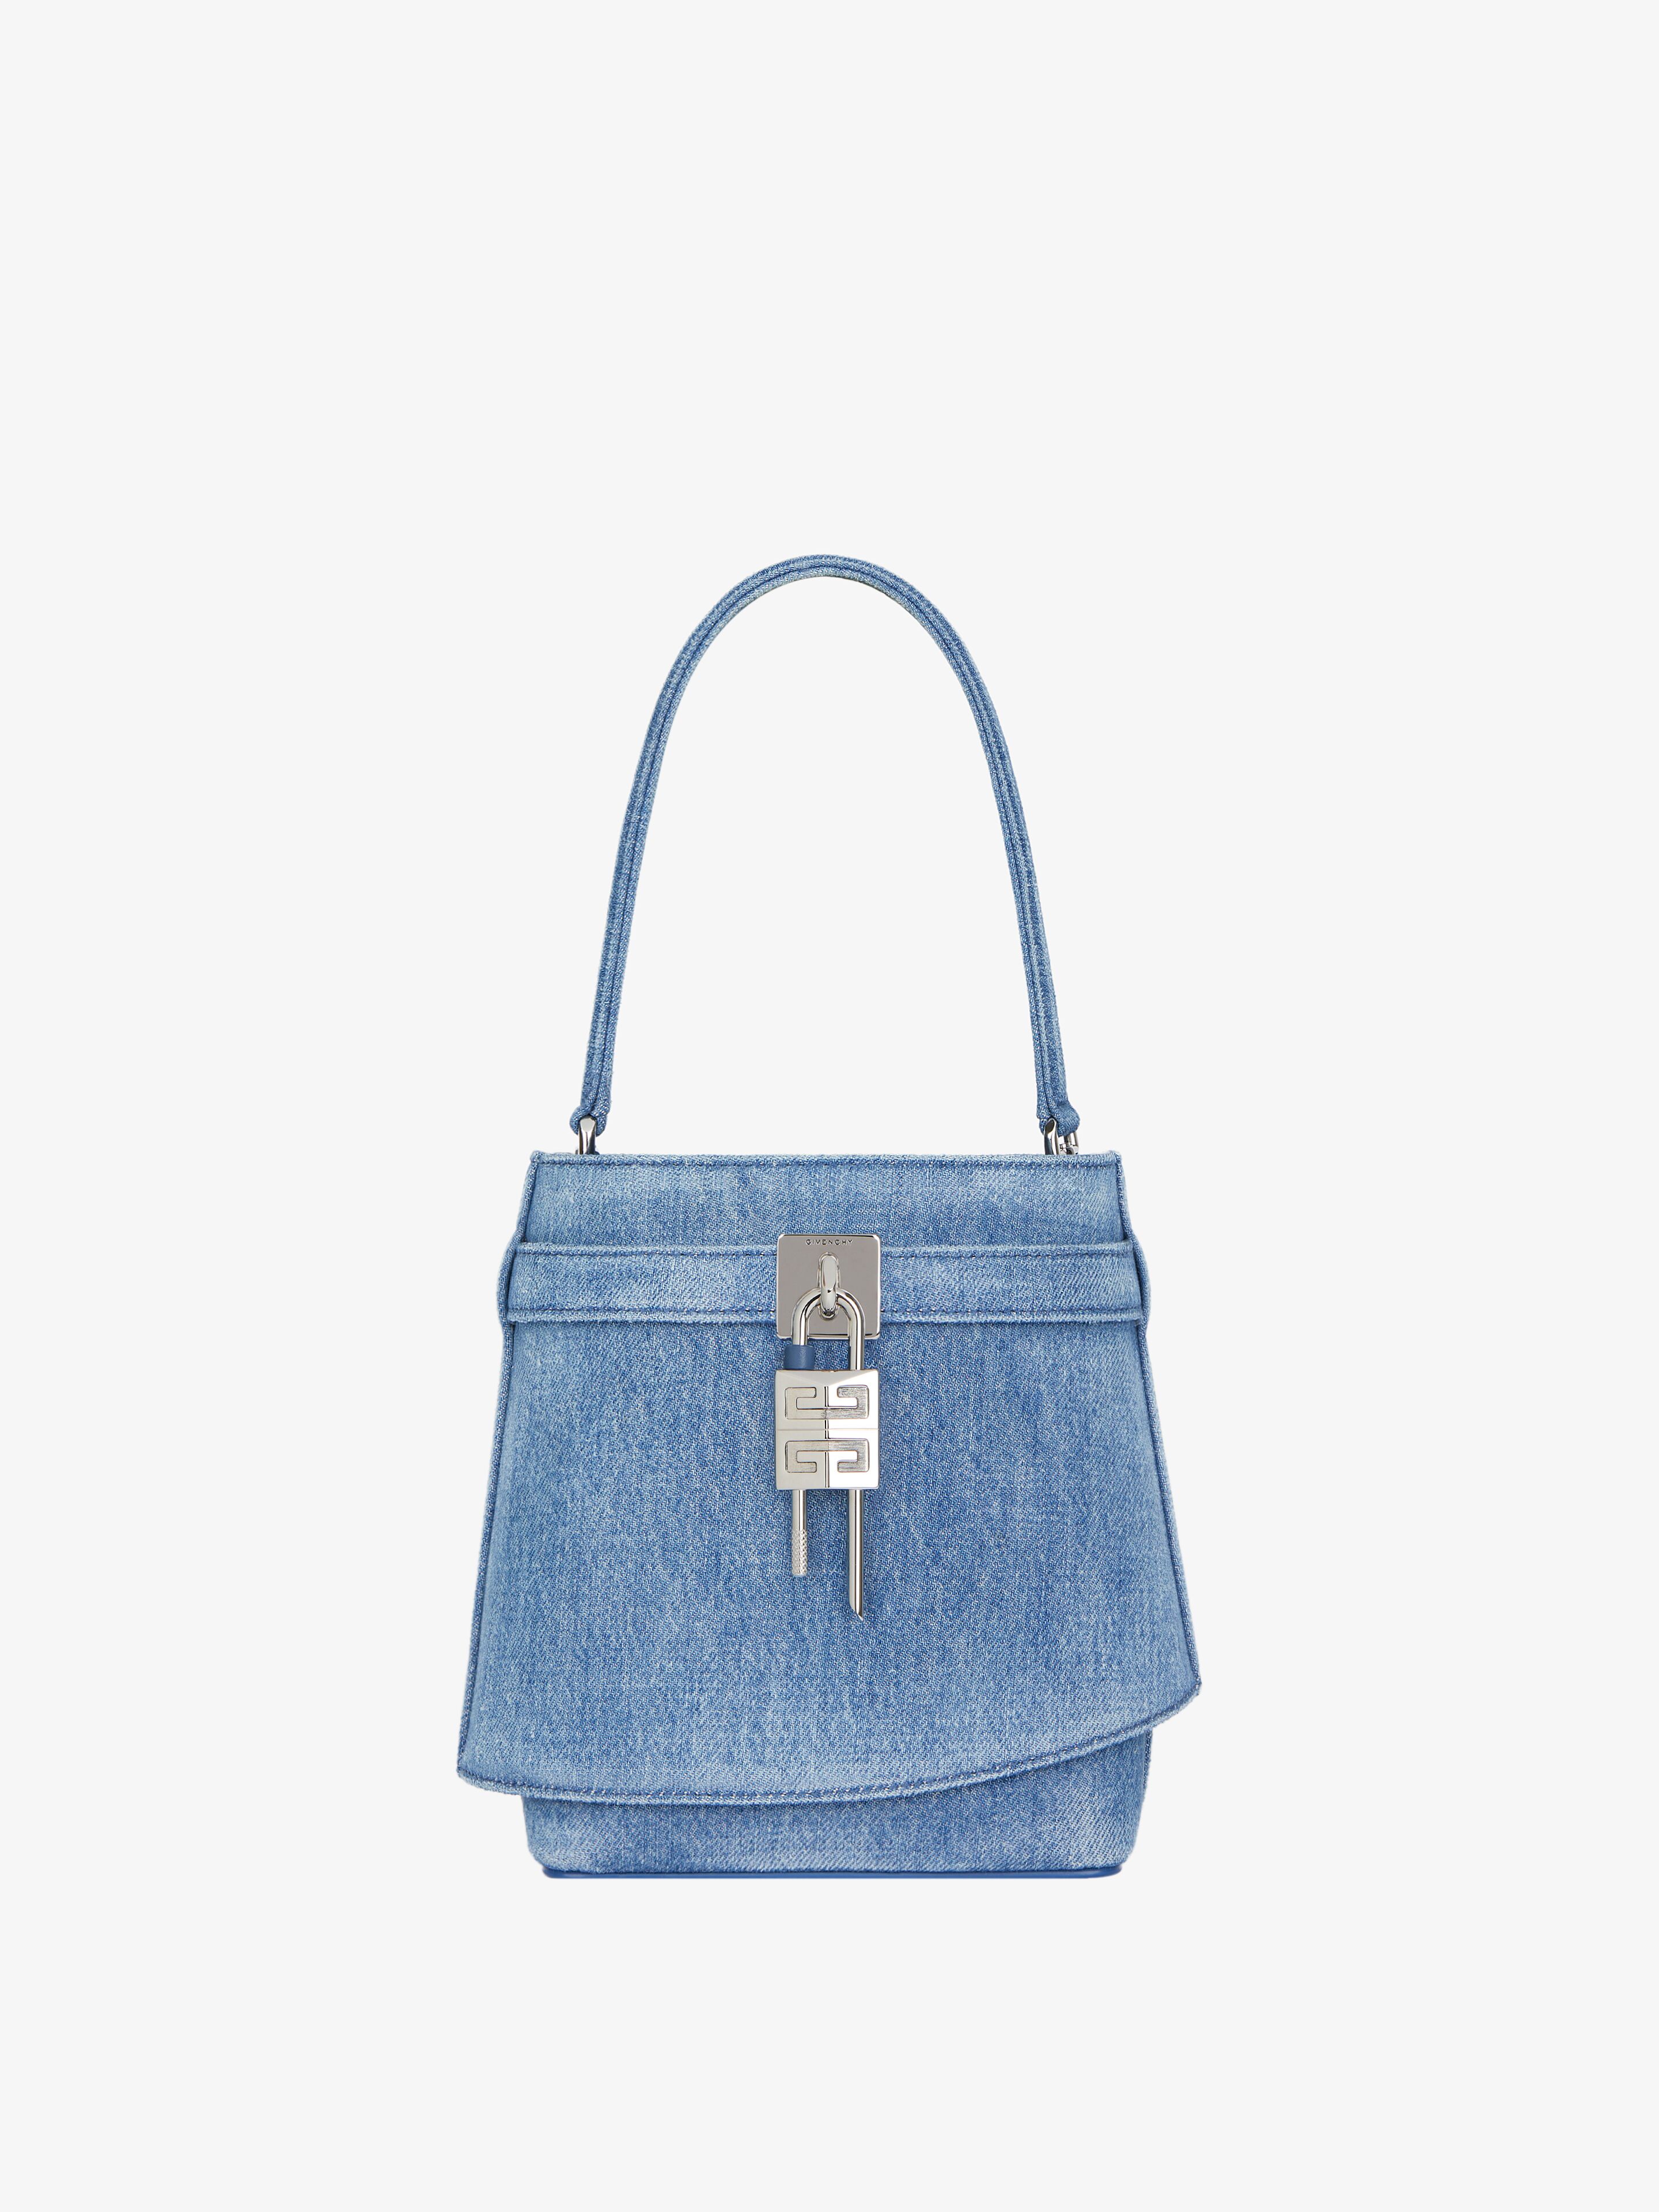 Givenchy Shark Lock Bucket Bag In Washed Denim In Brown